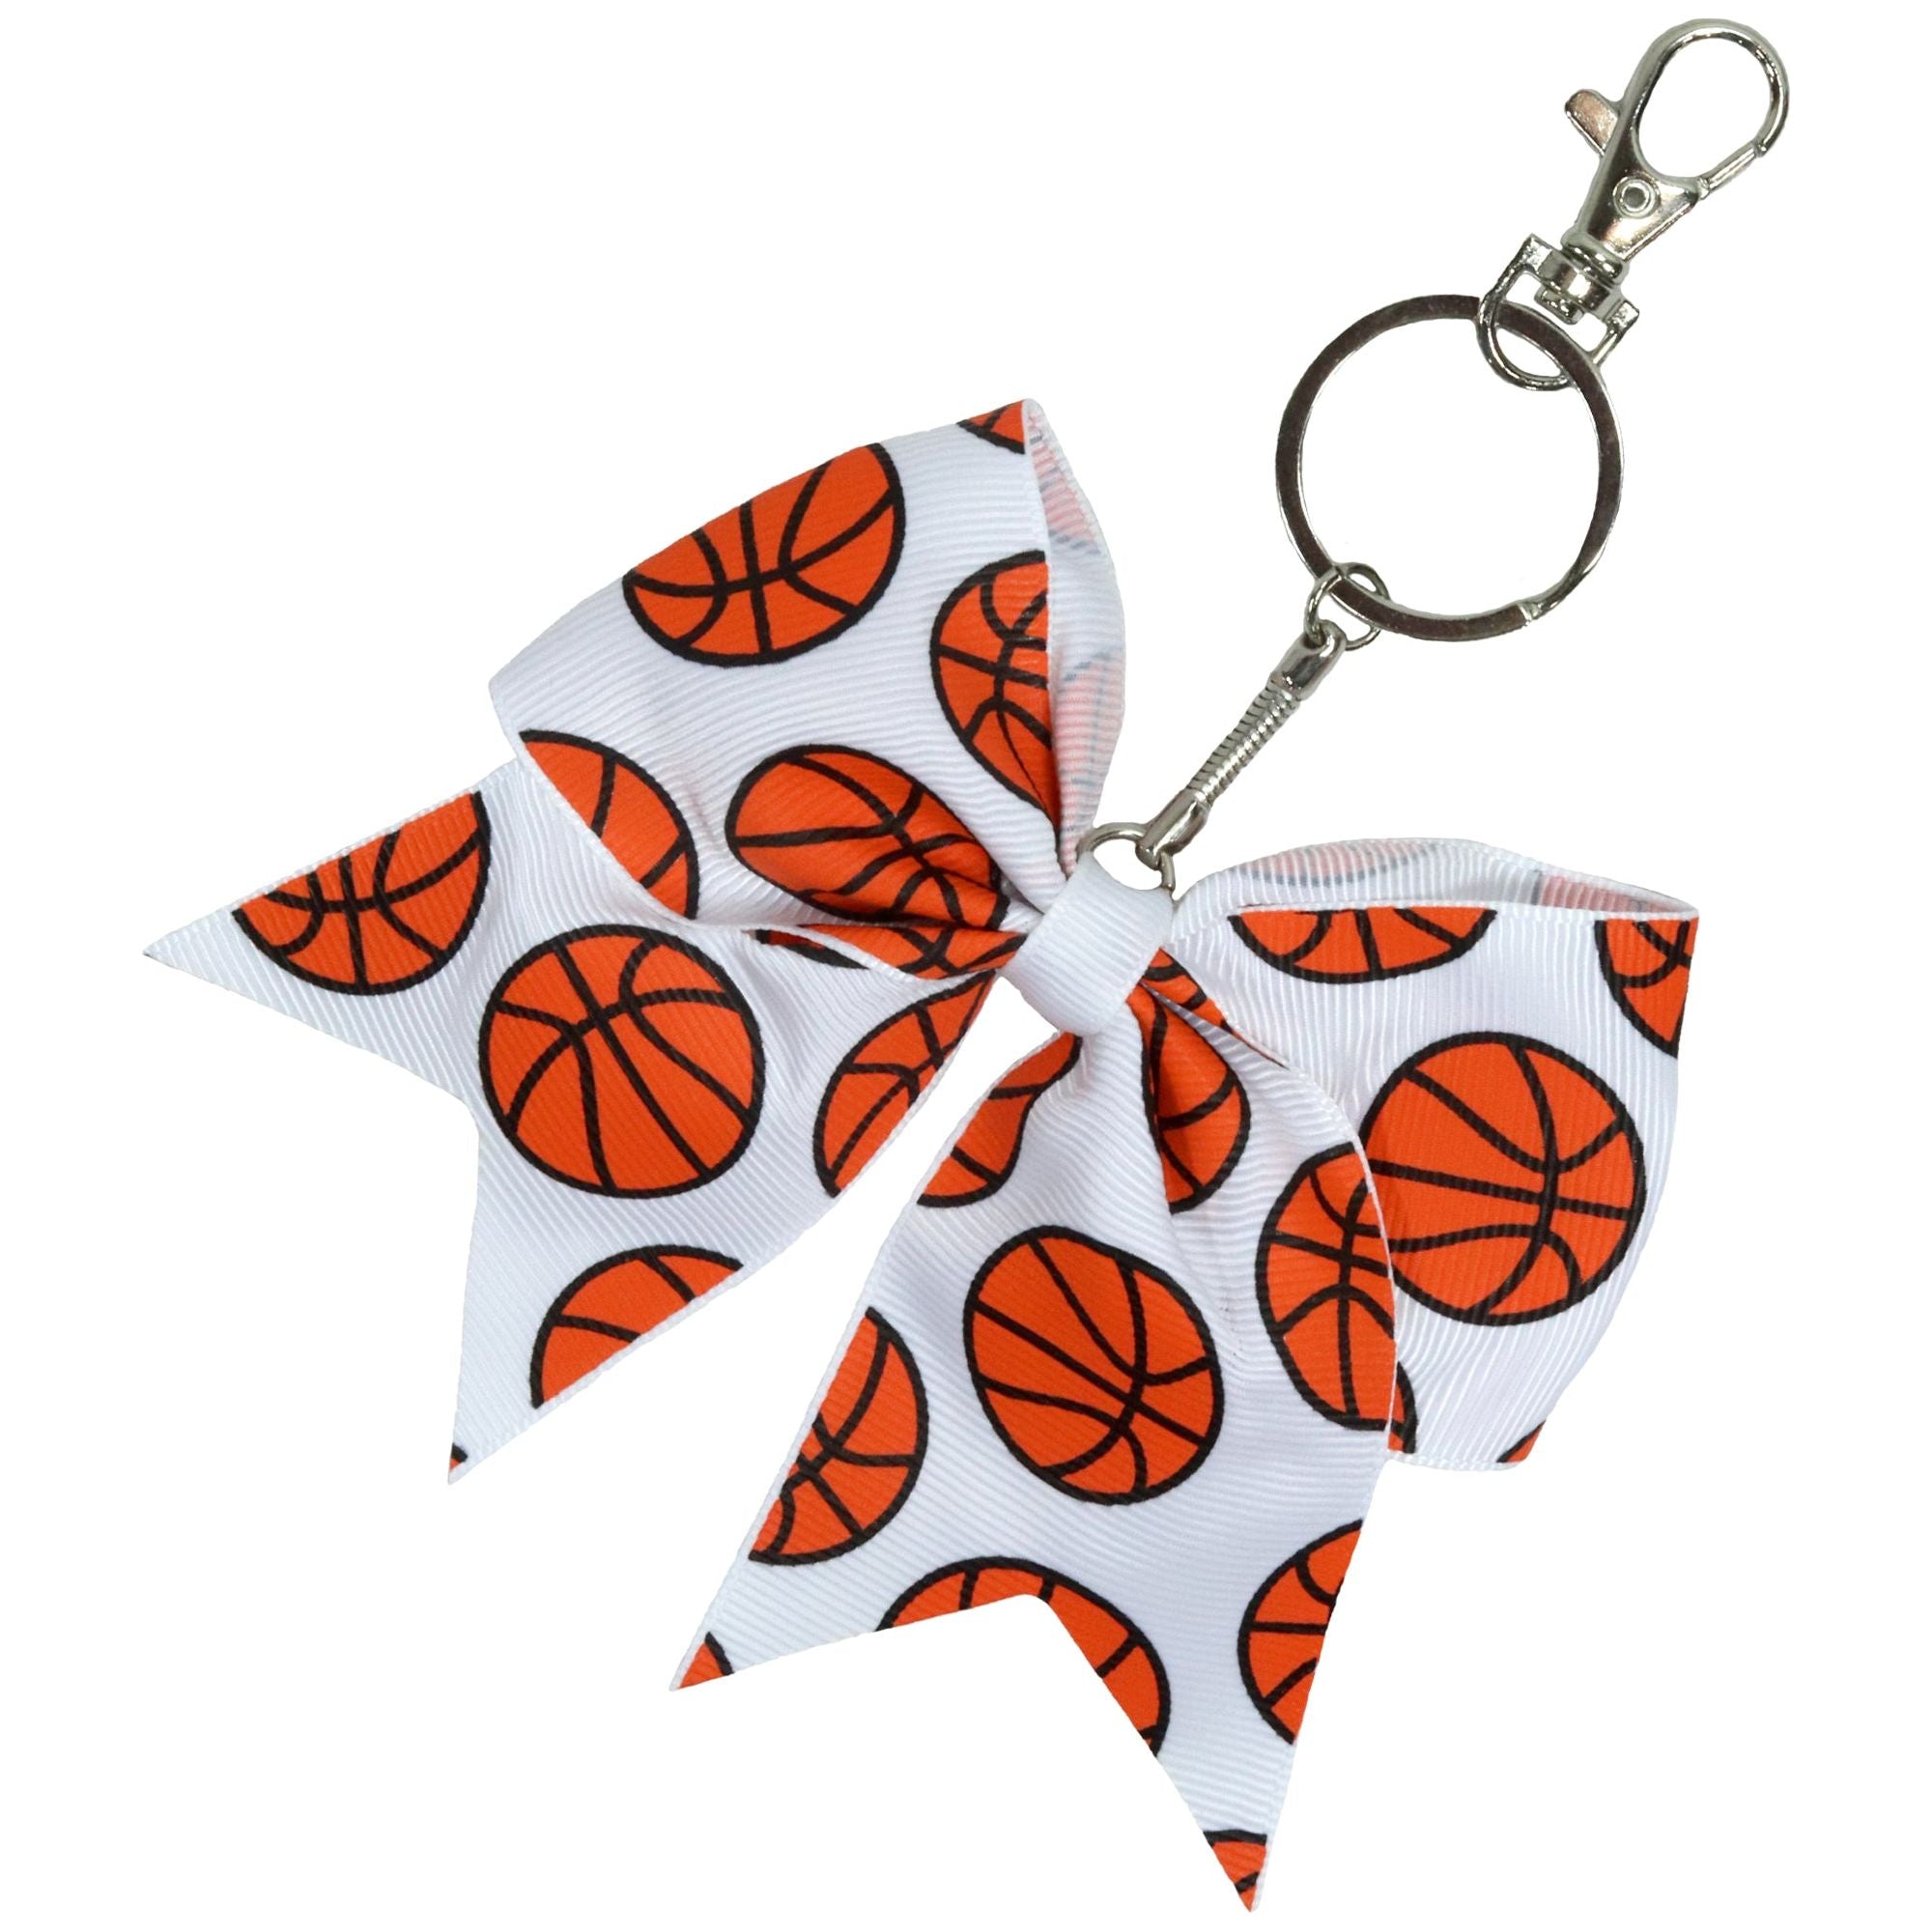 Gifts for Basketball Fans - Lids